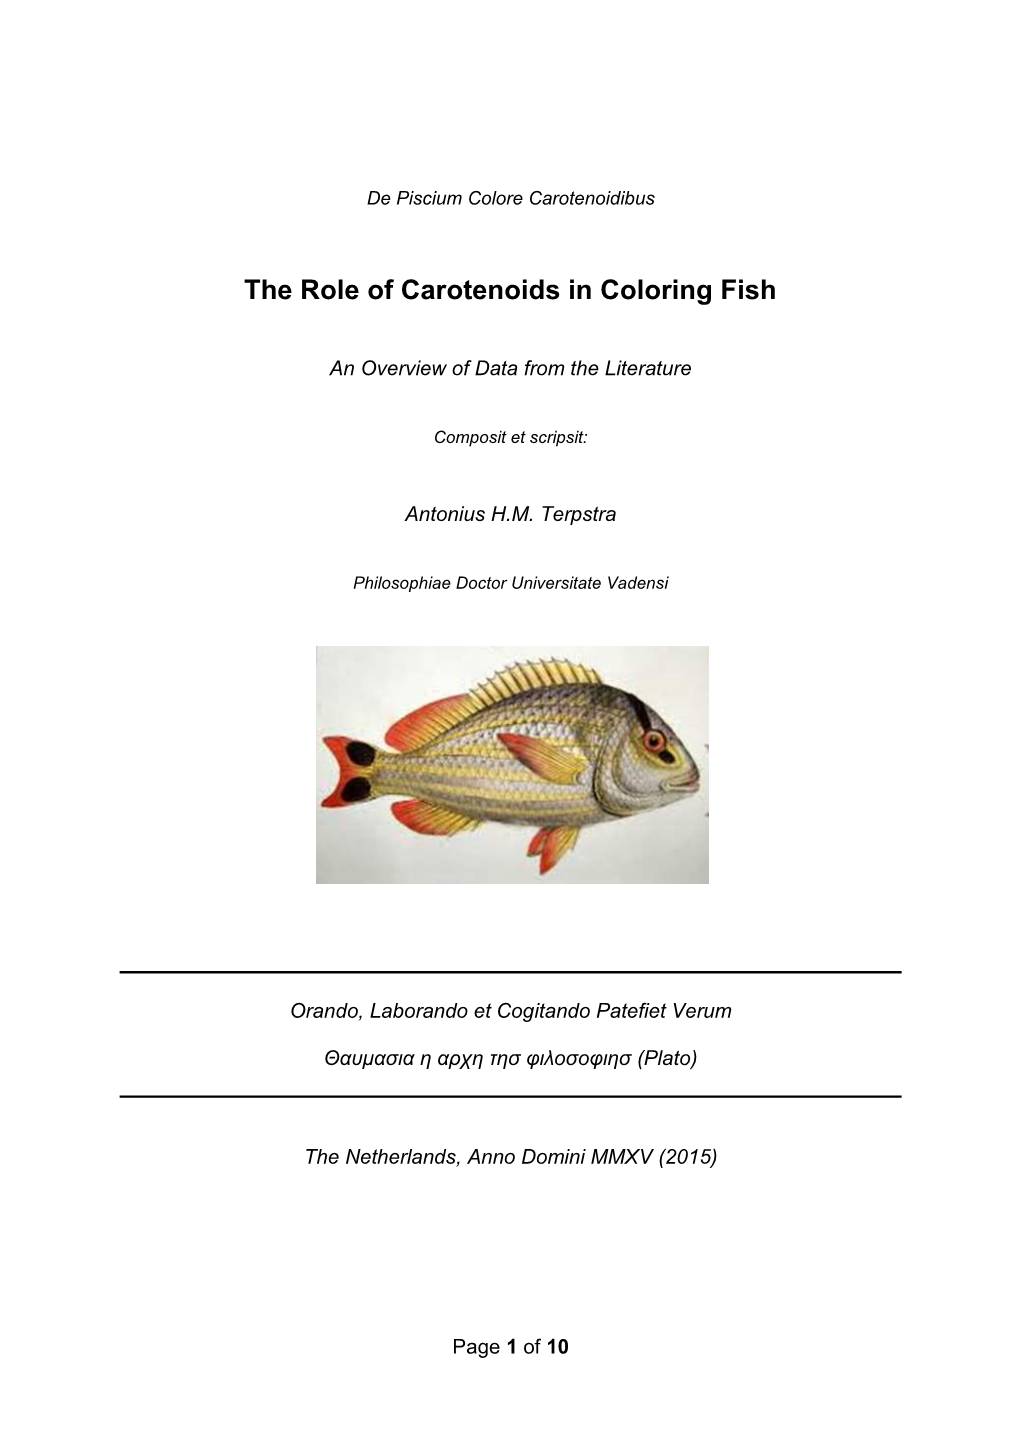 The Role of Carotenoids in Coloring Fish